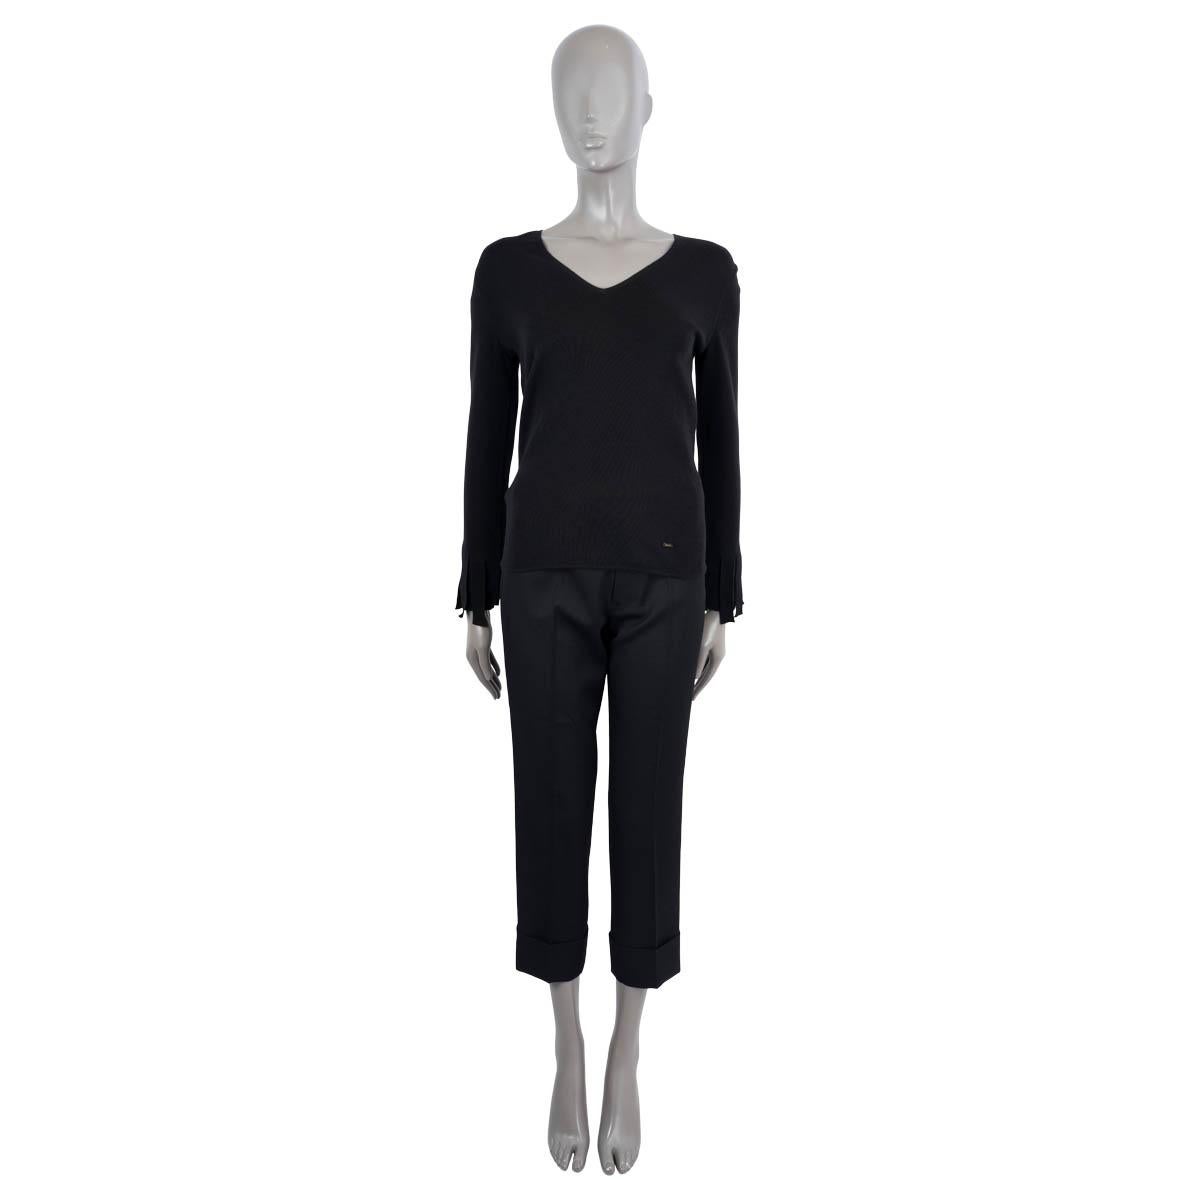 100% authentic AKRIS v-neck long sleeve fitted knit sweater in black cashemere (70%) and silk (30%) with fringed sleeve detail. Brand new with tags.

Measurements
Tag Size	38
Size	M
Shoulder Width	44cm (17.2in)
Bust	88cm (34.3in) to 110cm